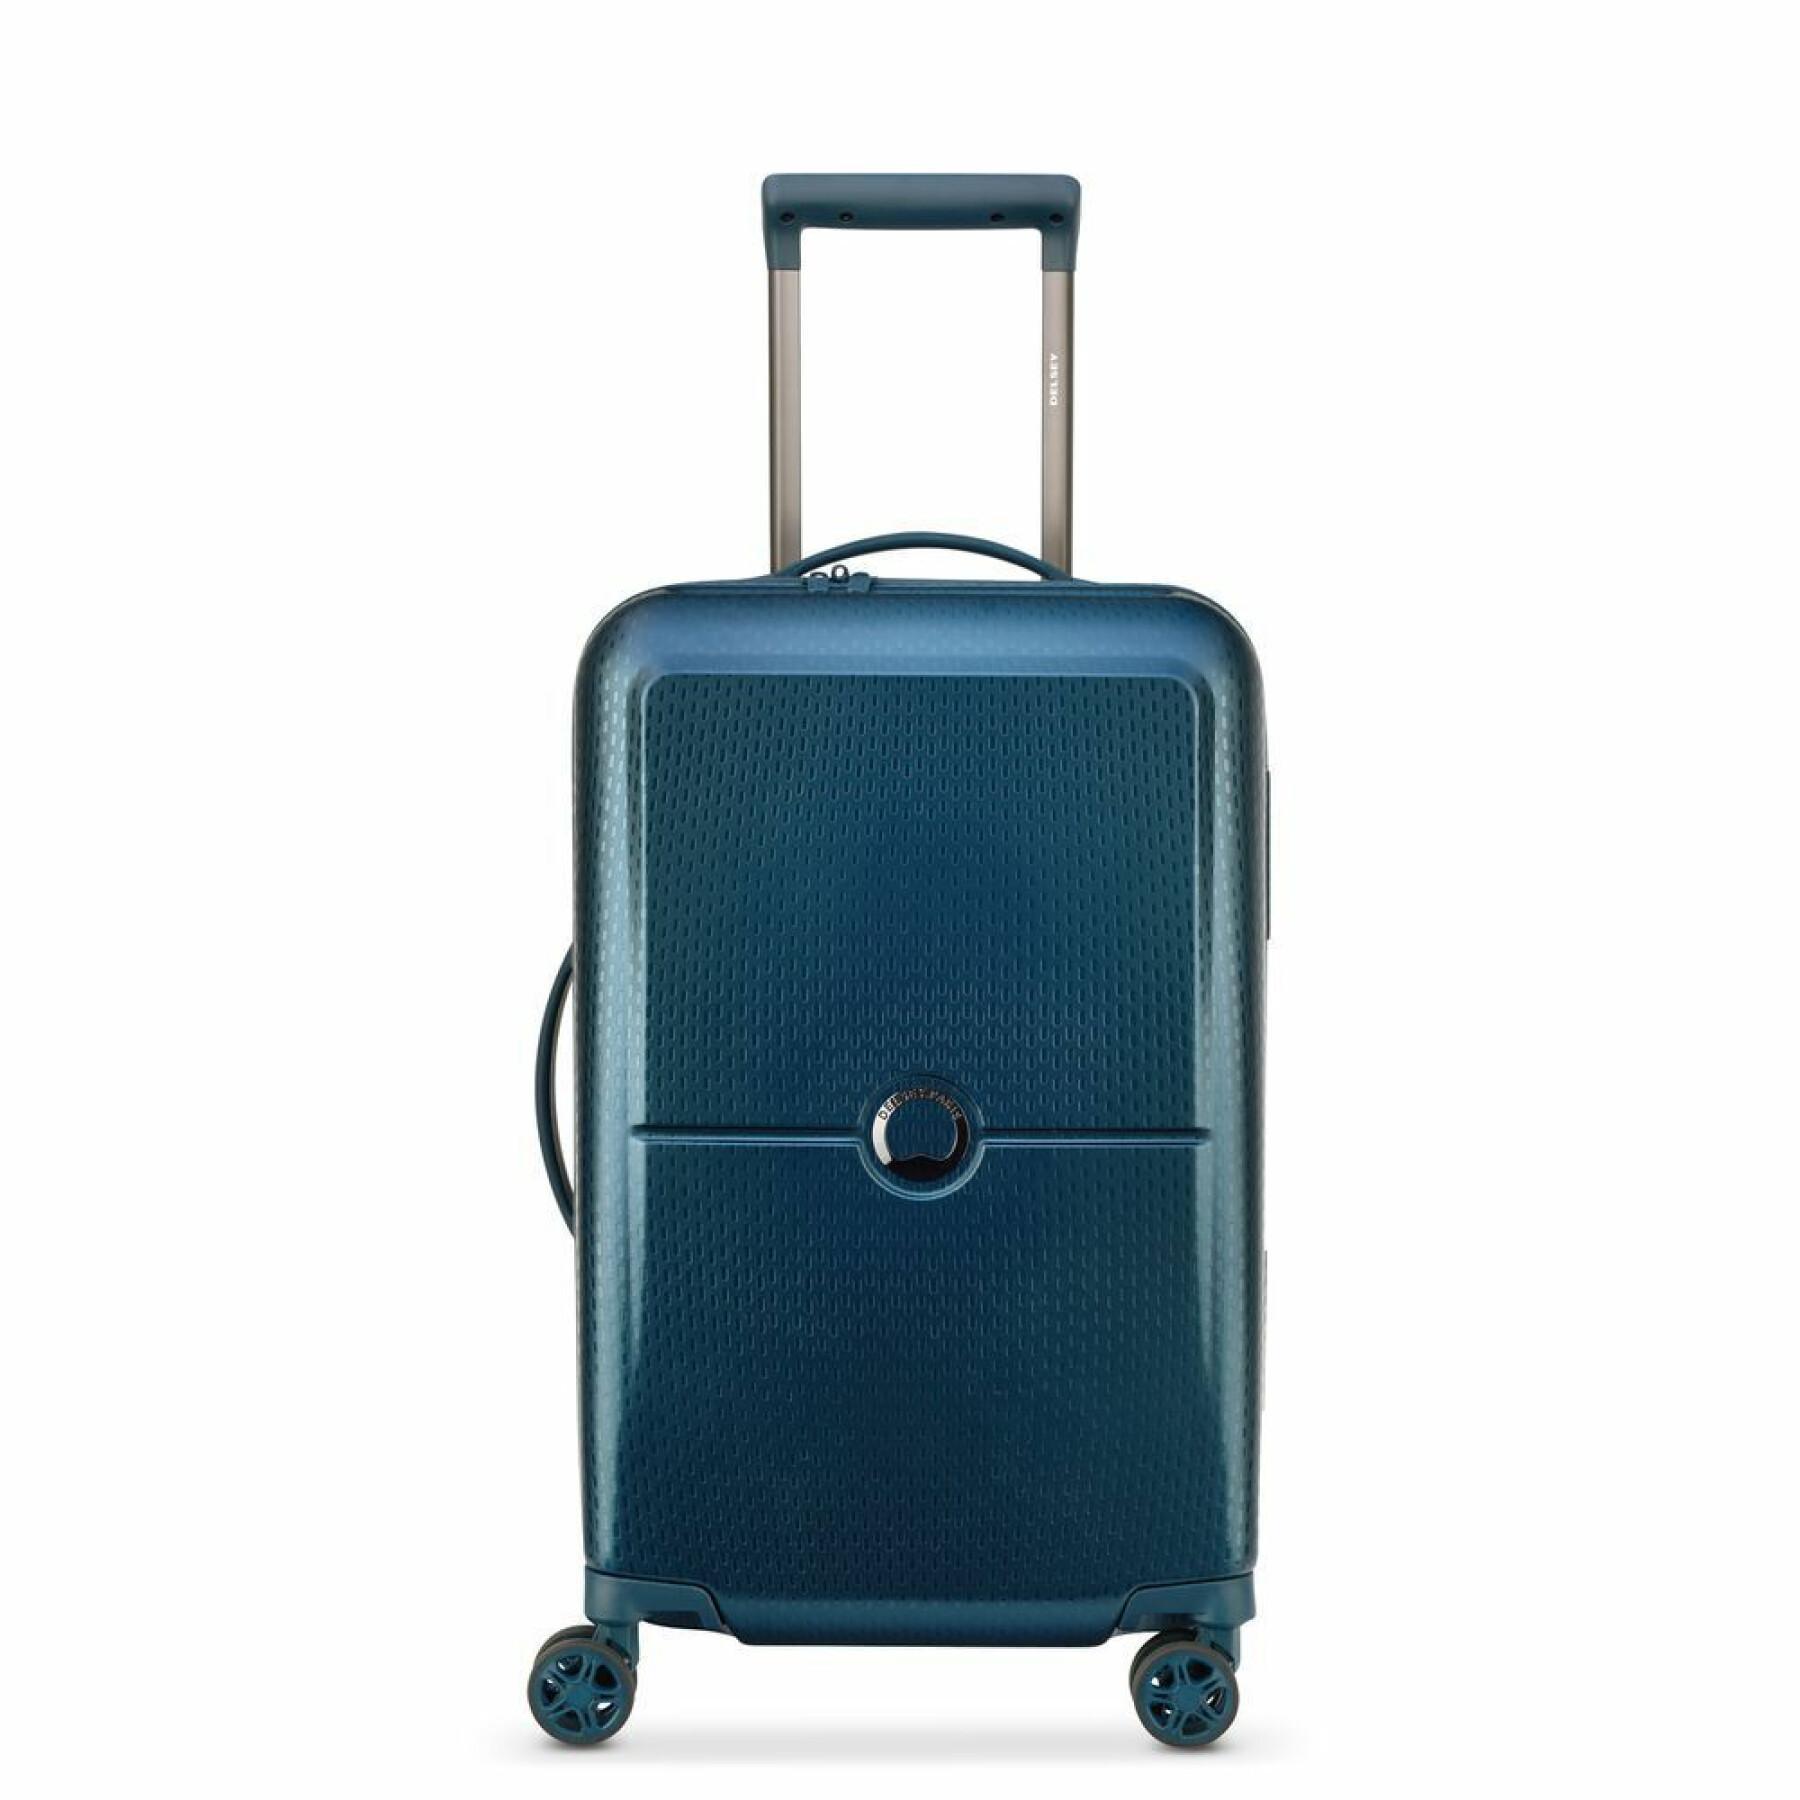 Valise trolley cabine 4 doubles roues Delsey Turenne 55 cm